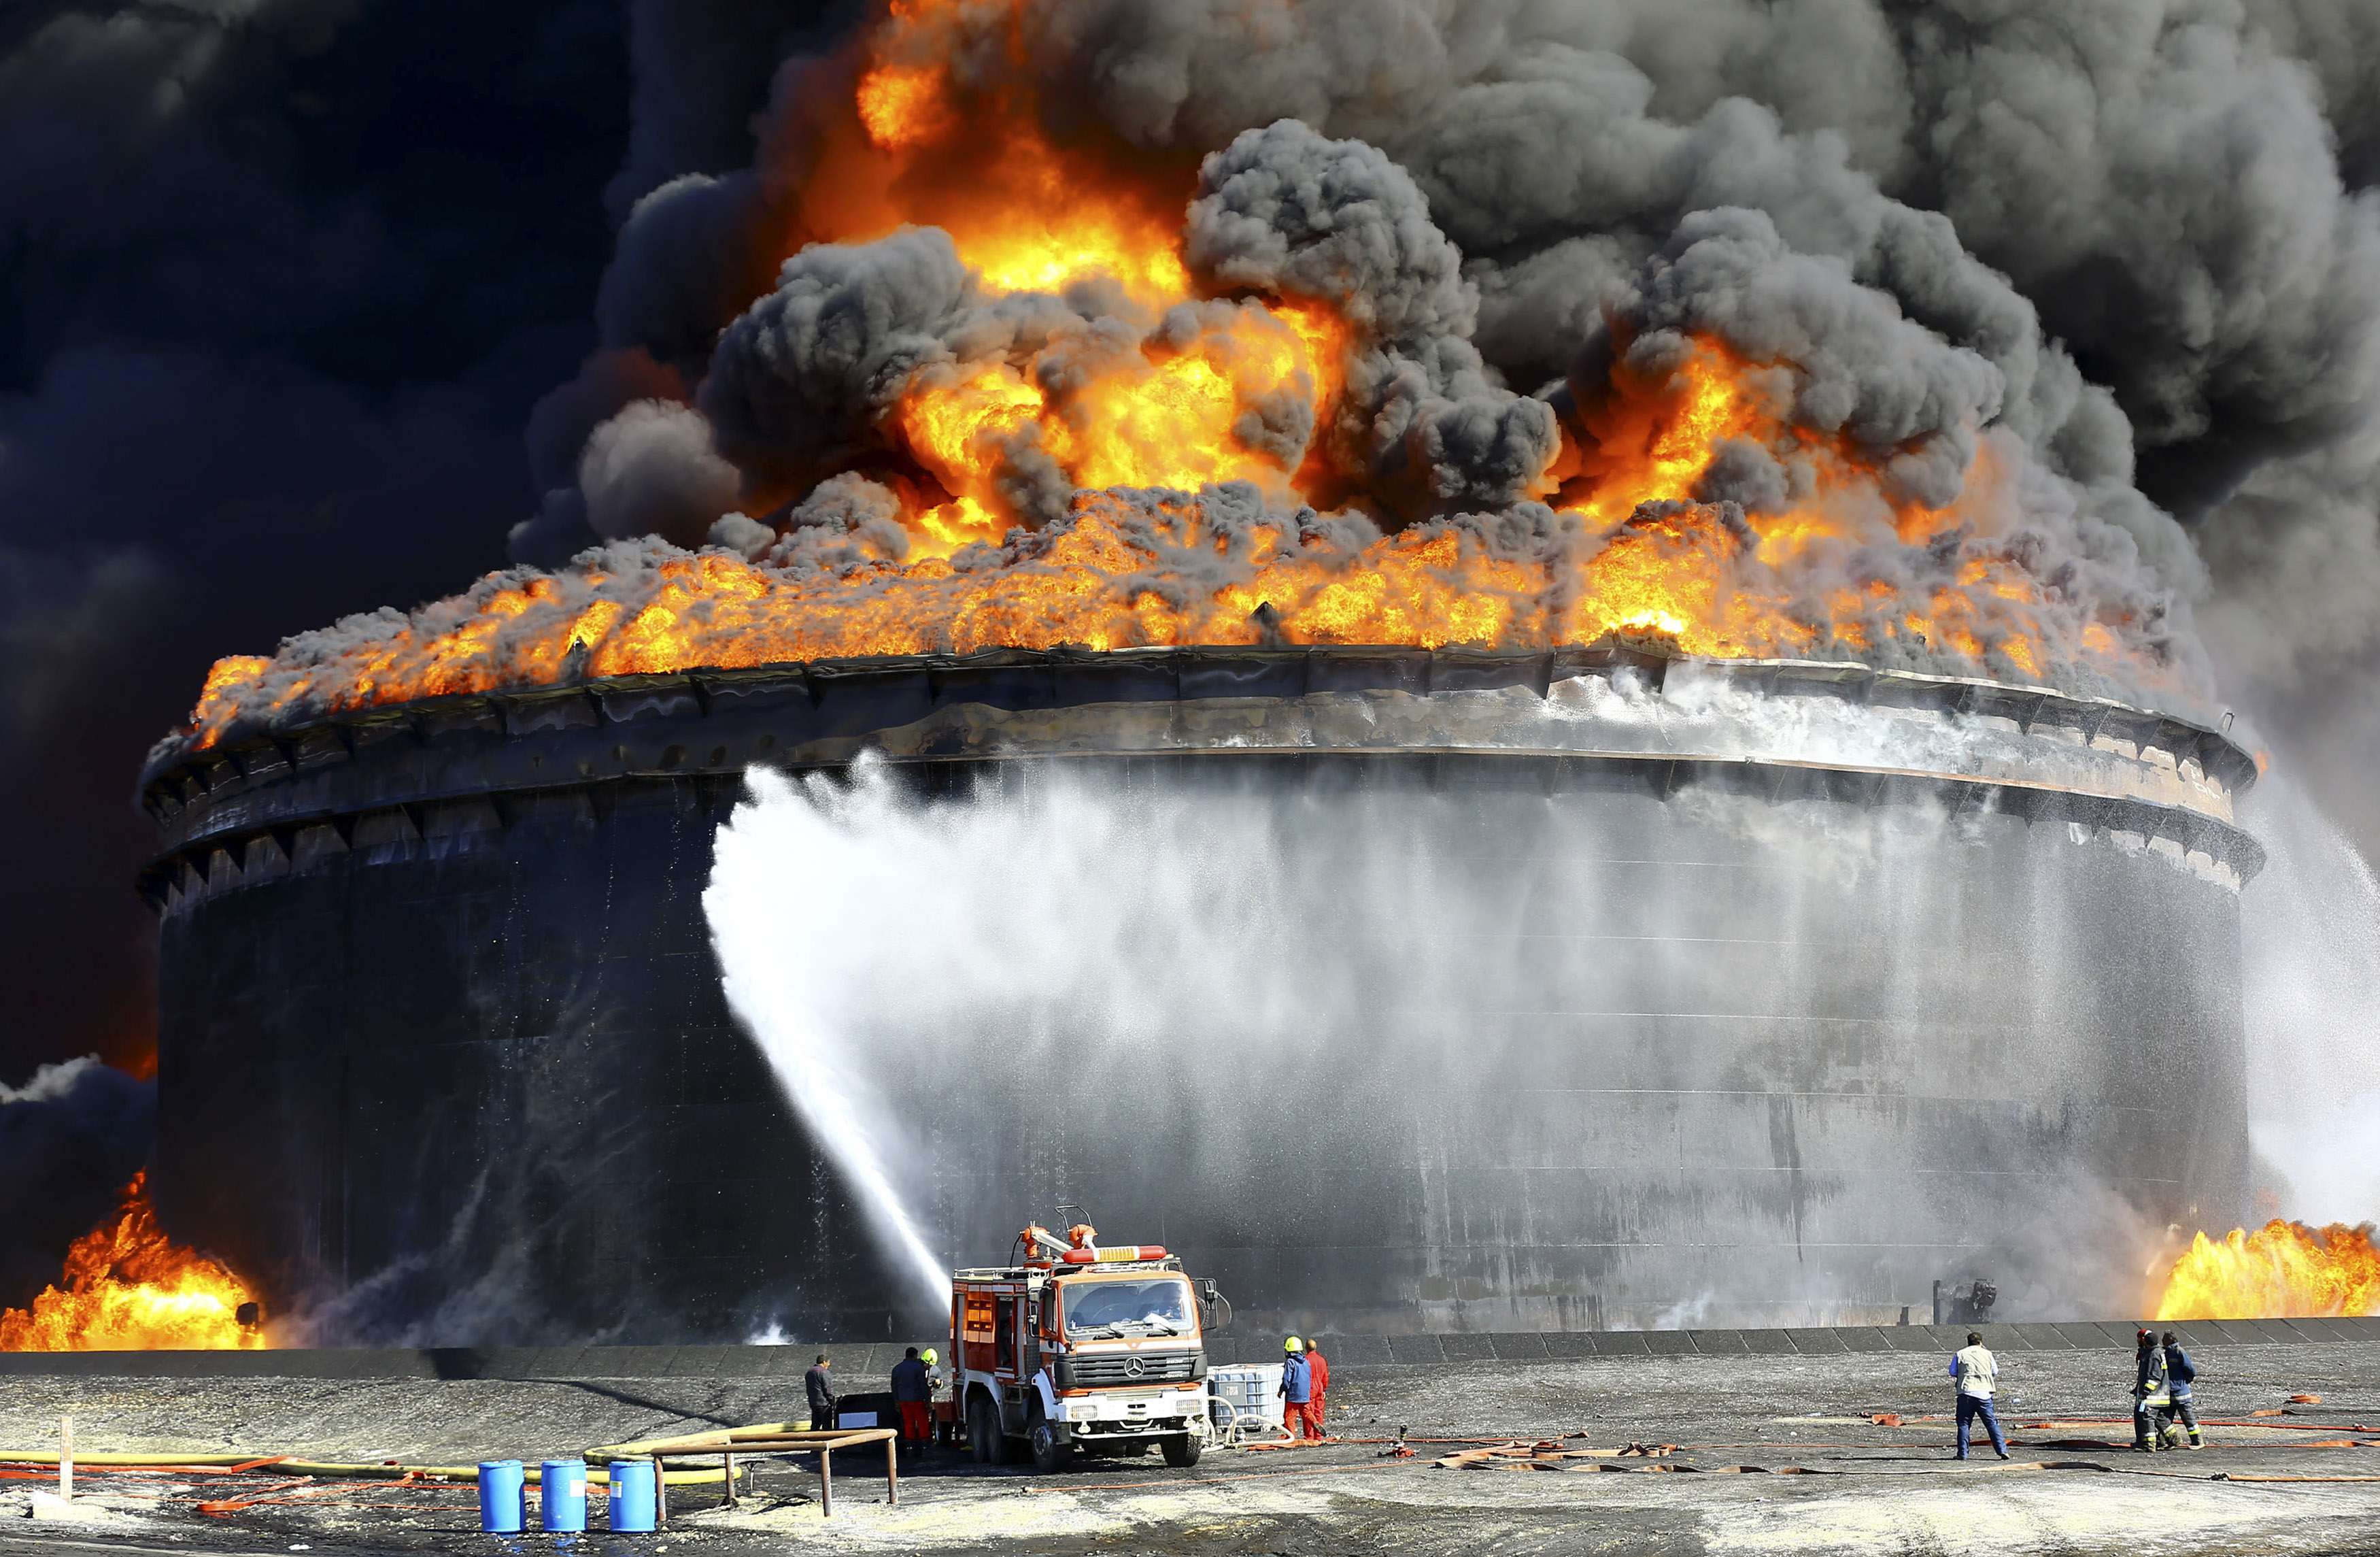 Firefighters work to put out the fire of a storage oil tank at the port of Es Sider in Ras Lanuf December 29, 2014. Oil tanks at Es Sider have been on fire for days after a rocket hit one of them, destroying more than two days of Libyan production, officials said on Sunday. Libya has appealed to Italy, Germany and the United States to send firefighters. REUTERS/Stringer (LIBYA - Tags: CIVIL UNREST POLITICS CONFLICT ENERGY TPX IMAGES OF THE DAY)